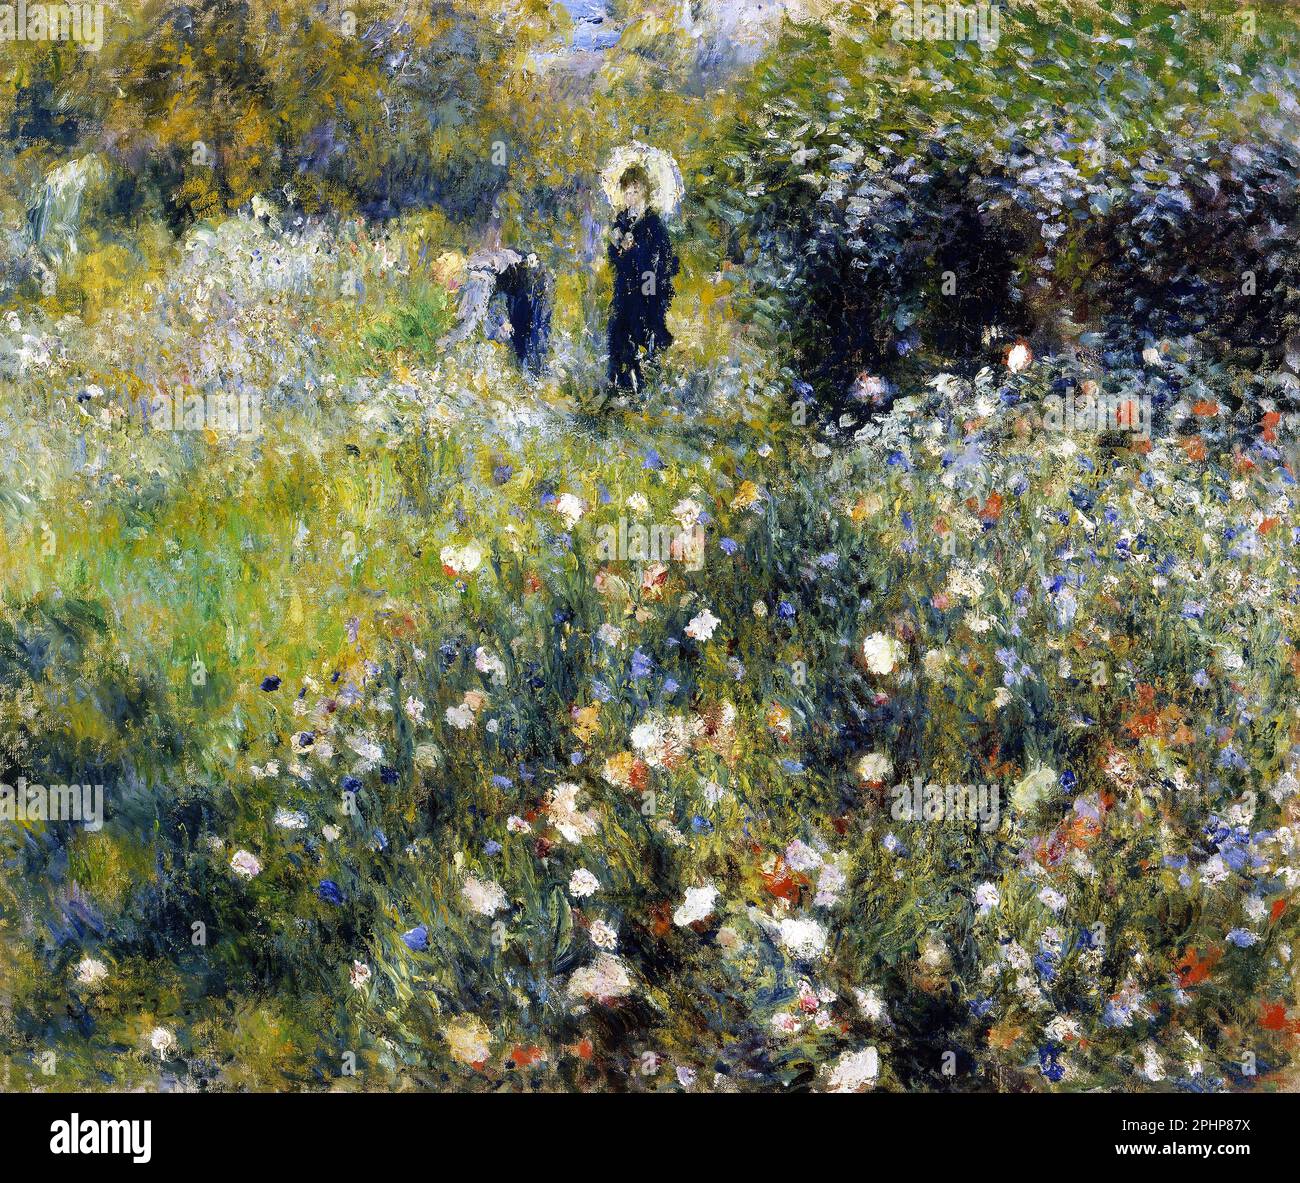 Woman with a Parasol in a Garden by Pierre Auguste Renoir (1841-1919), oil on canvas, 1875 Stock Photo